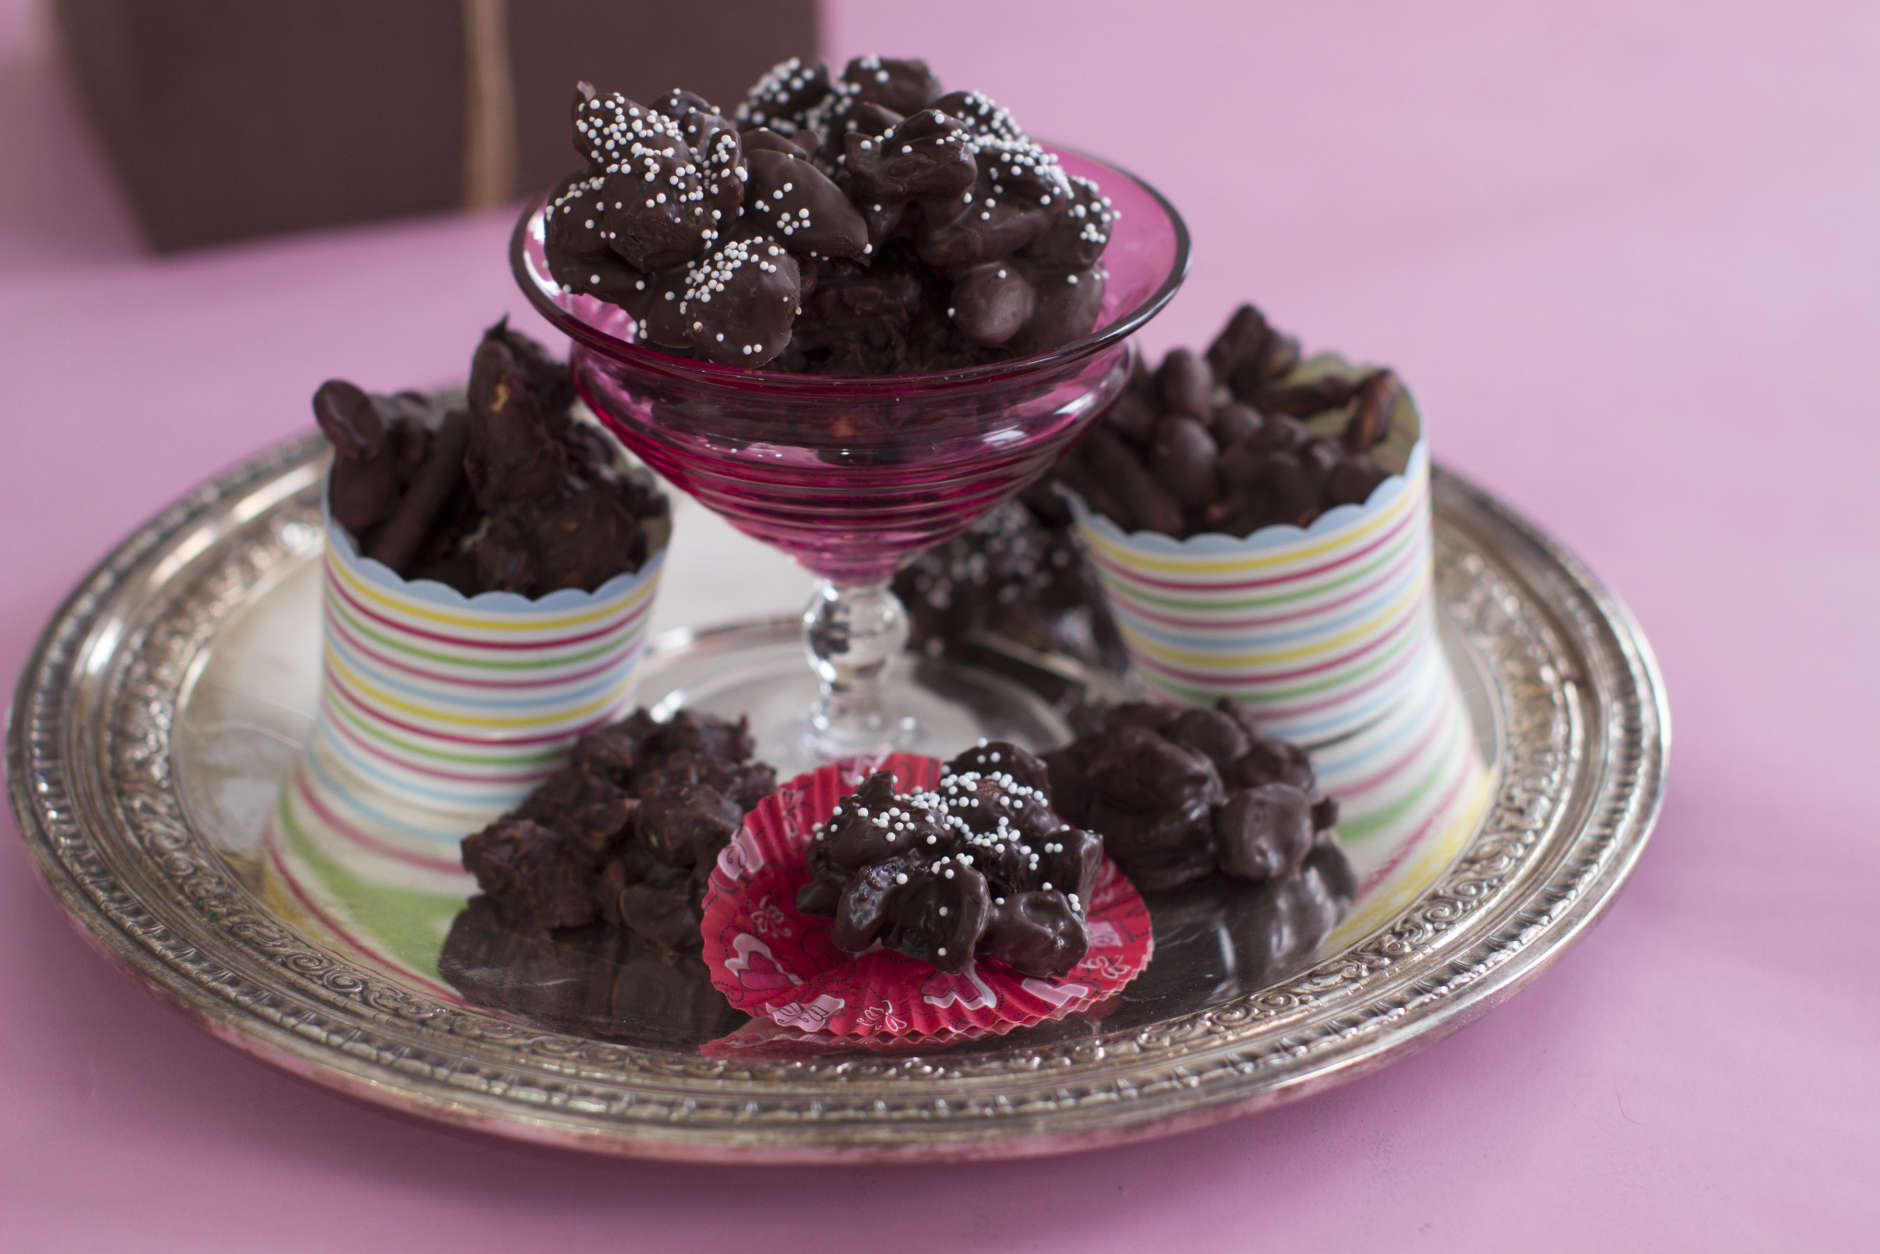 This Jan. 12, 2015 photo shows chocolate candy clusters in Concord, N.H. This is from a recipe by Elizabeth Karmel. (AP Photo/Matthew Mead)